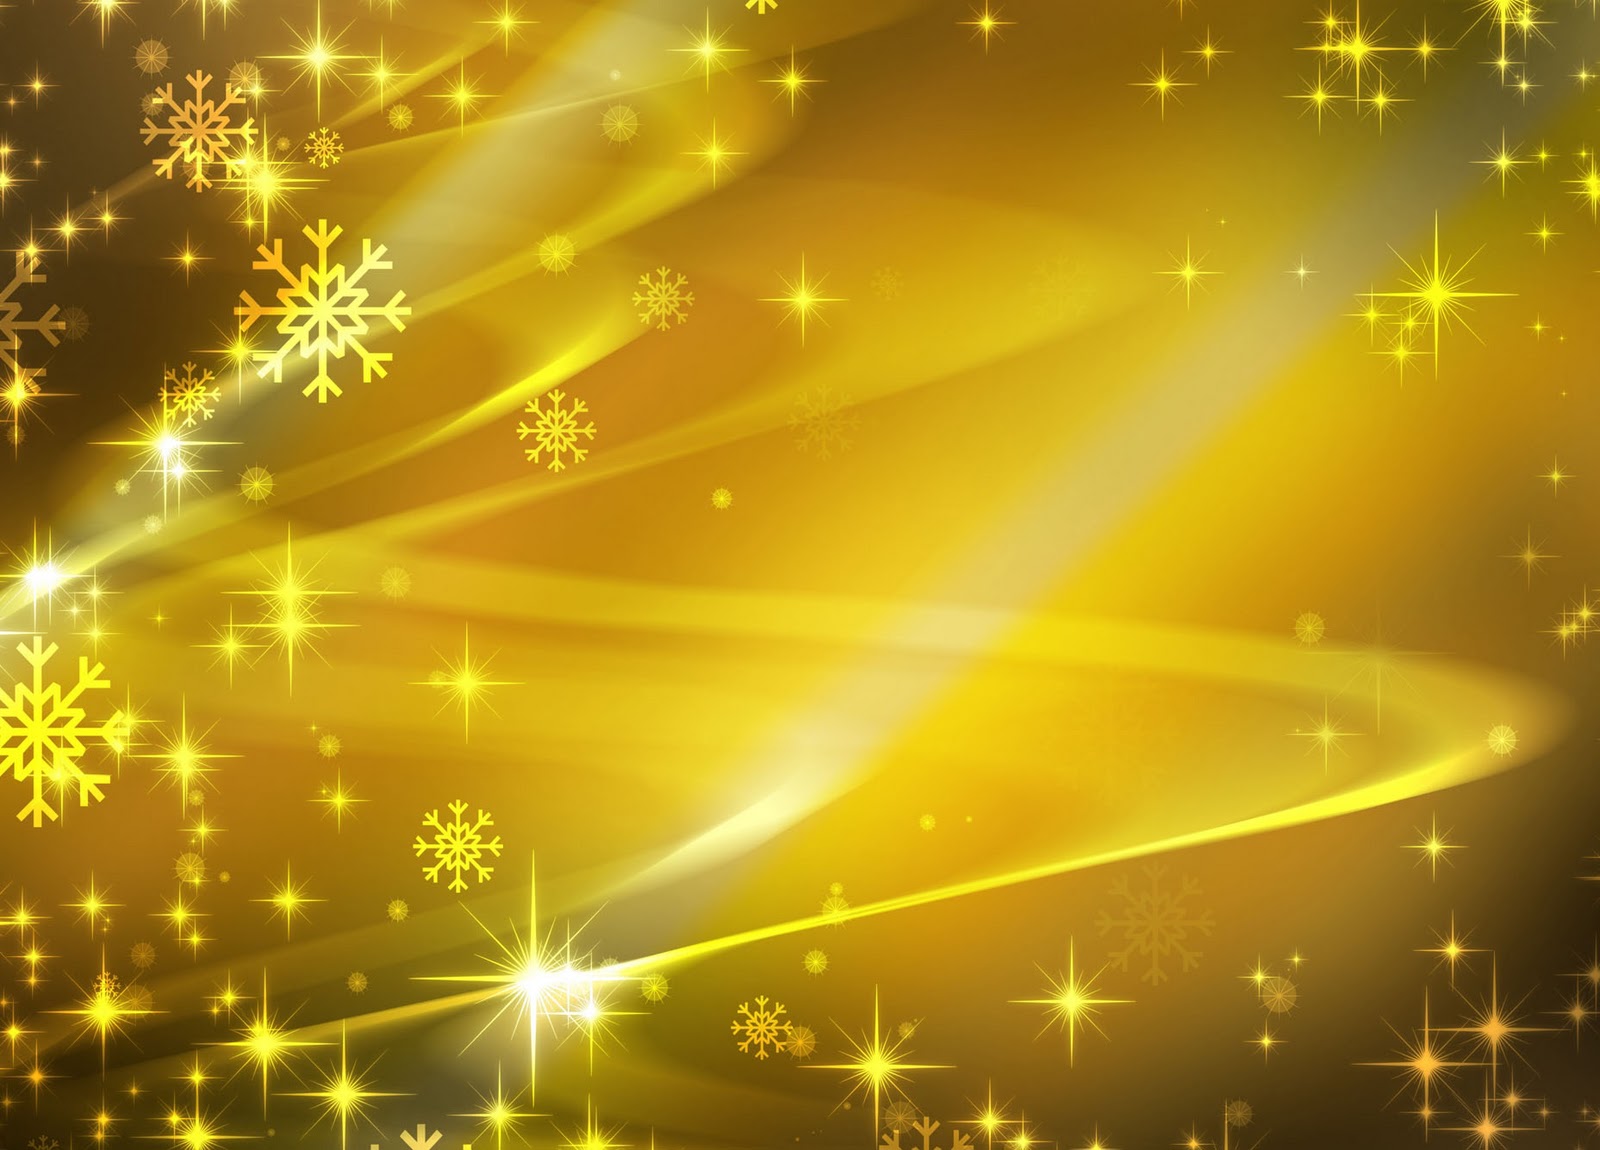 Christmas Backgrounds 8193 Hd Wallpapers in Celebrations   Imagesci 1600x1150